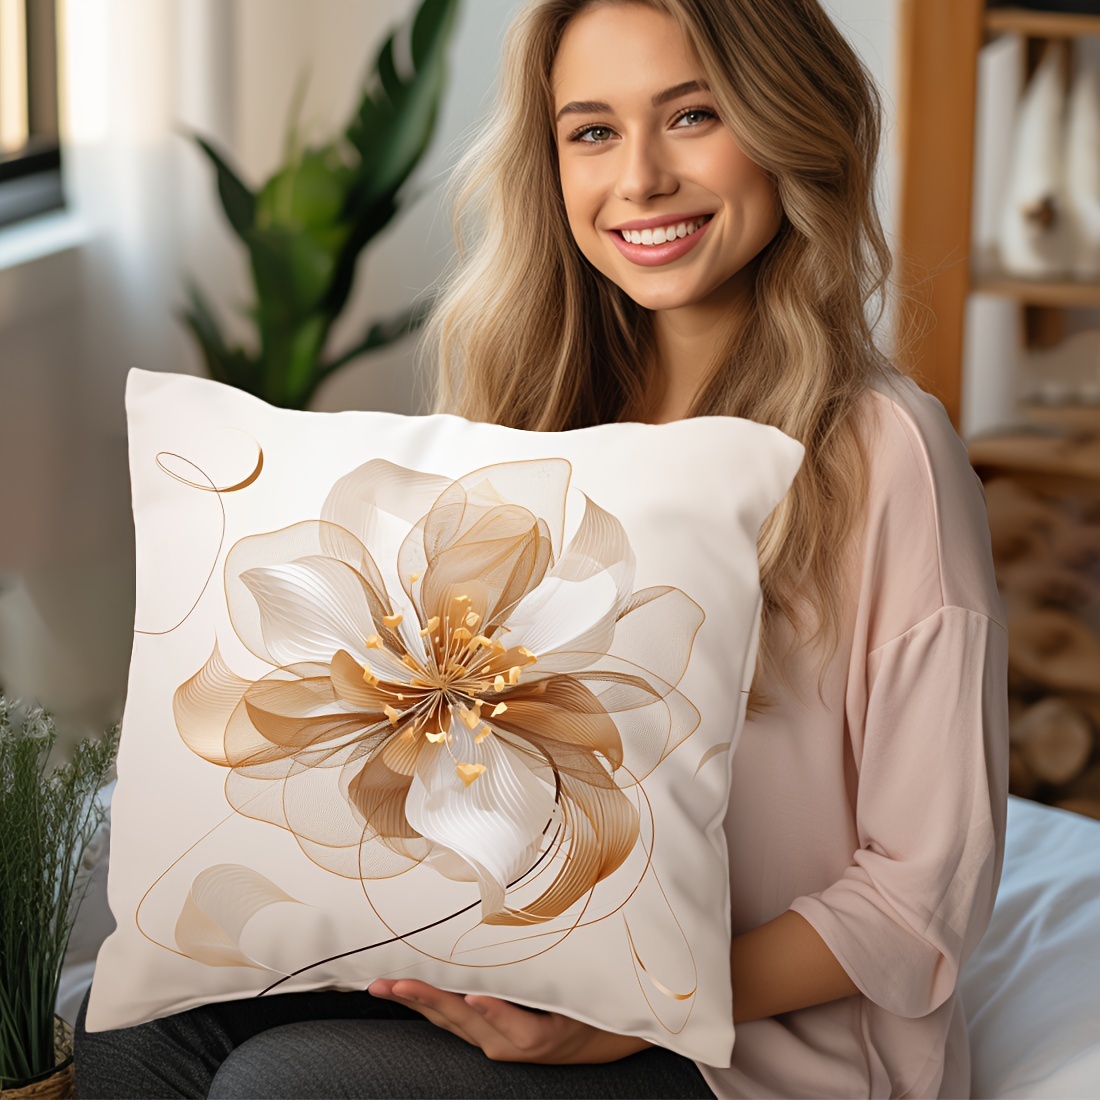 

1pc, 45x45cm Contemporary Style Floral Cushion Cover, Peach Skin Velvet, Decorative Throw Pillow Case For Sofa, Living Room, Bedroom, Car, Pillowcase Only, Single-sided Print, Home Decor - No Insert